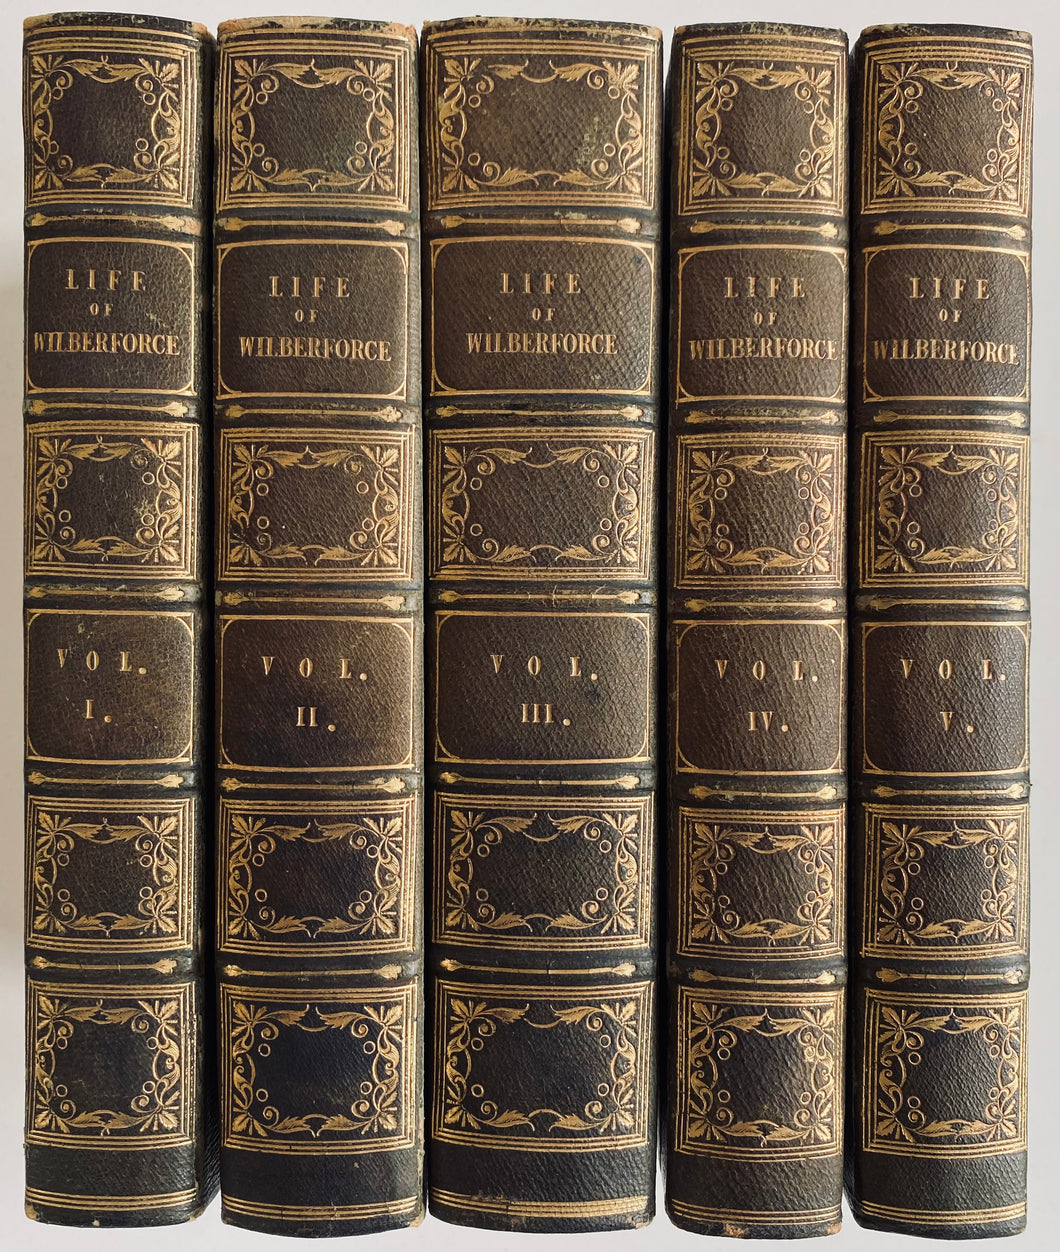 1838 WILLIAM WILBERFORCE. First Edition Life of William Wilberforce - In Five Fine Leather Bindings.